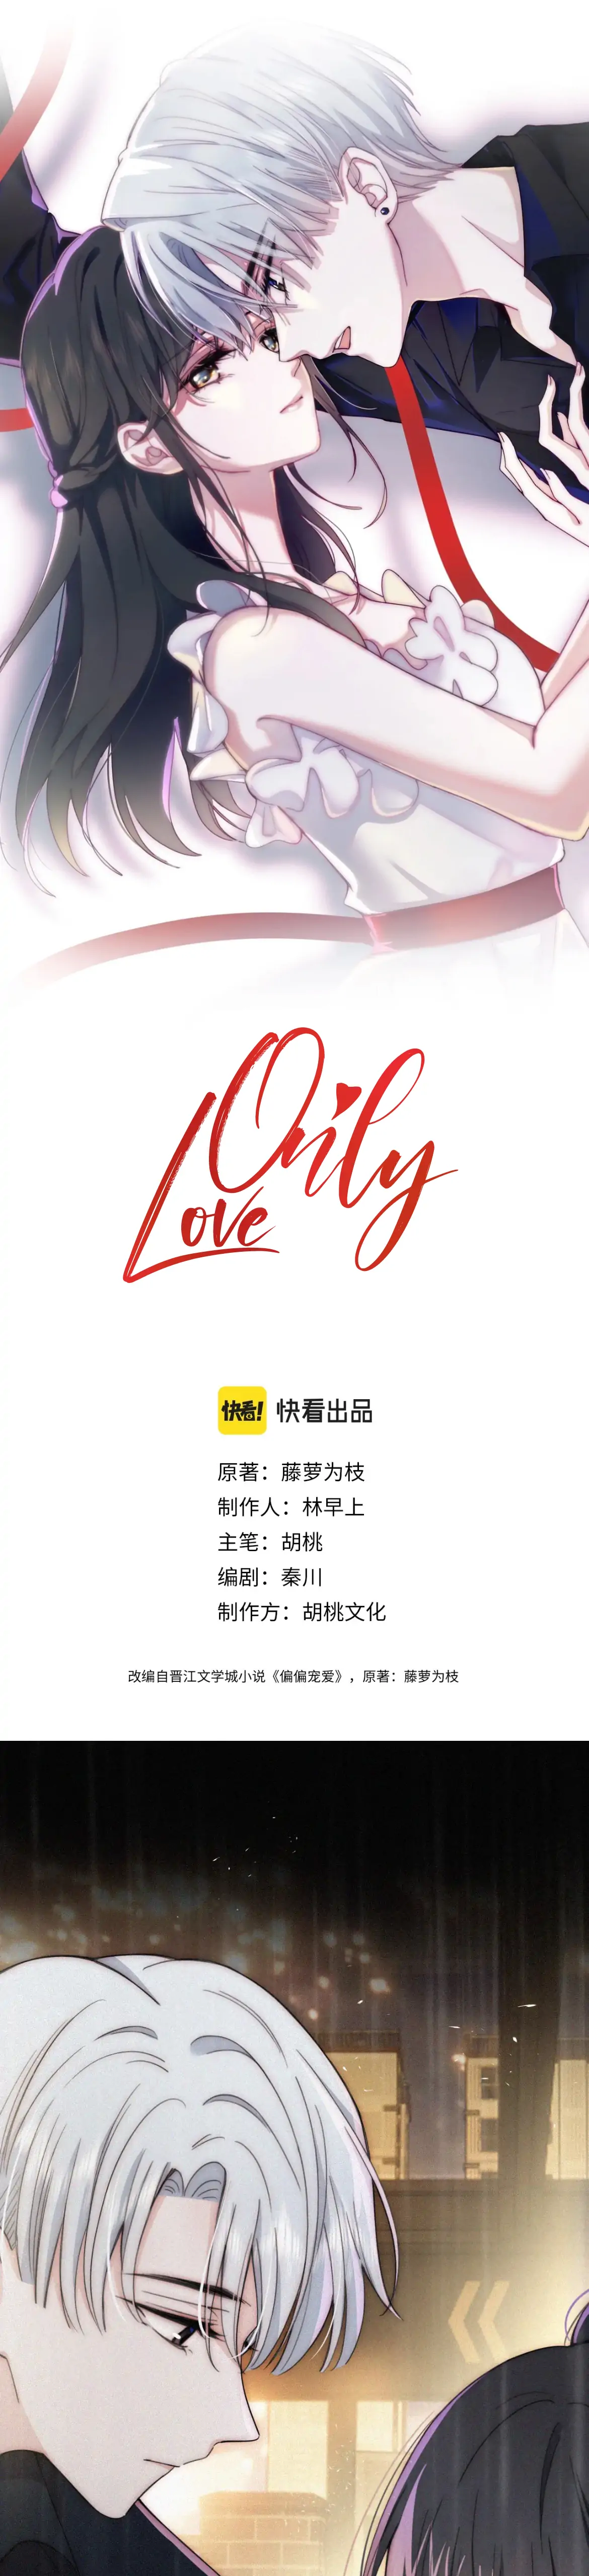 Only Love chapter 12